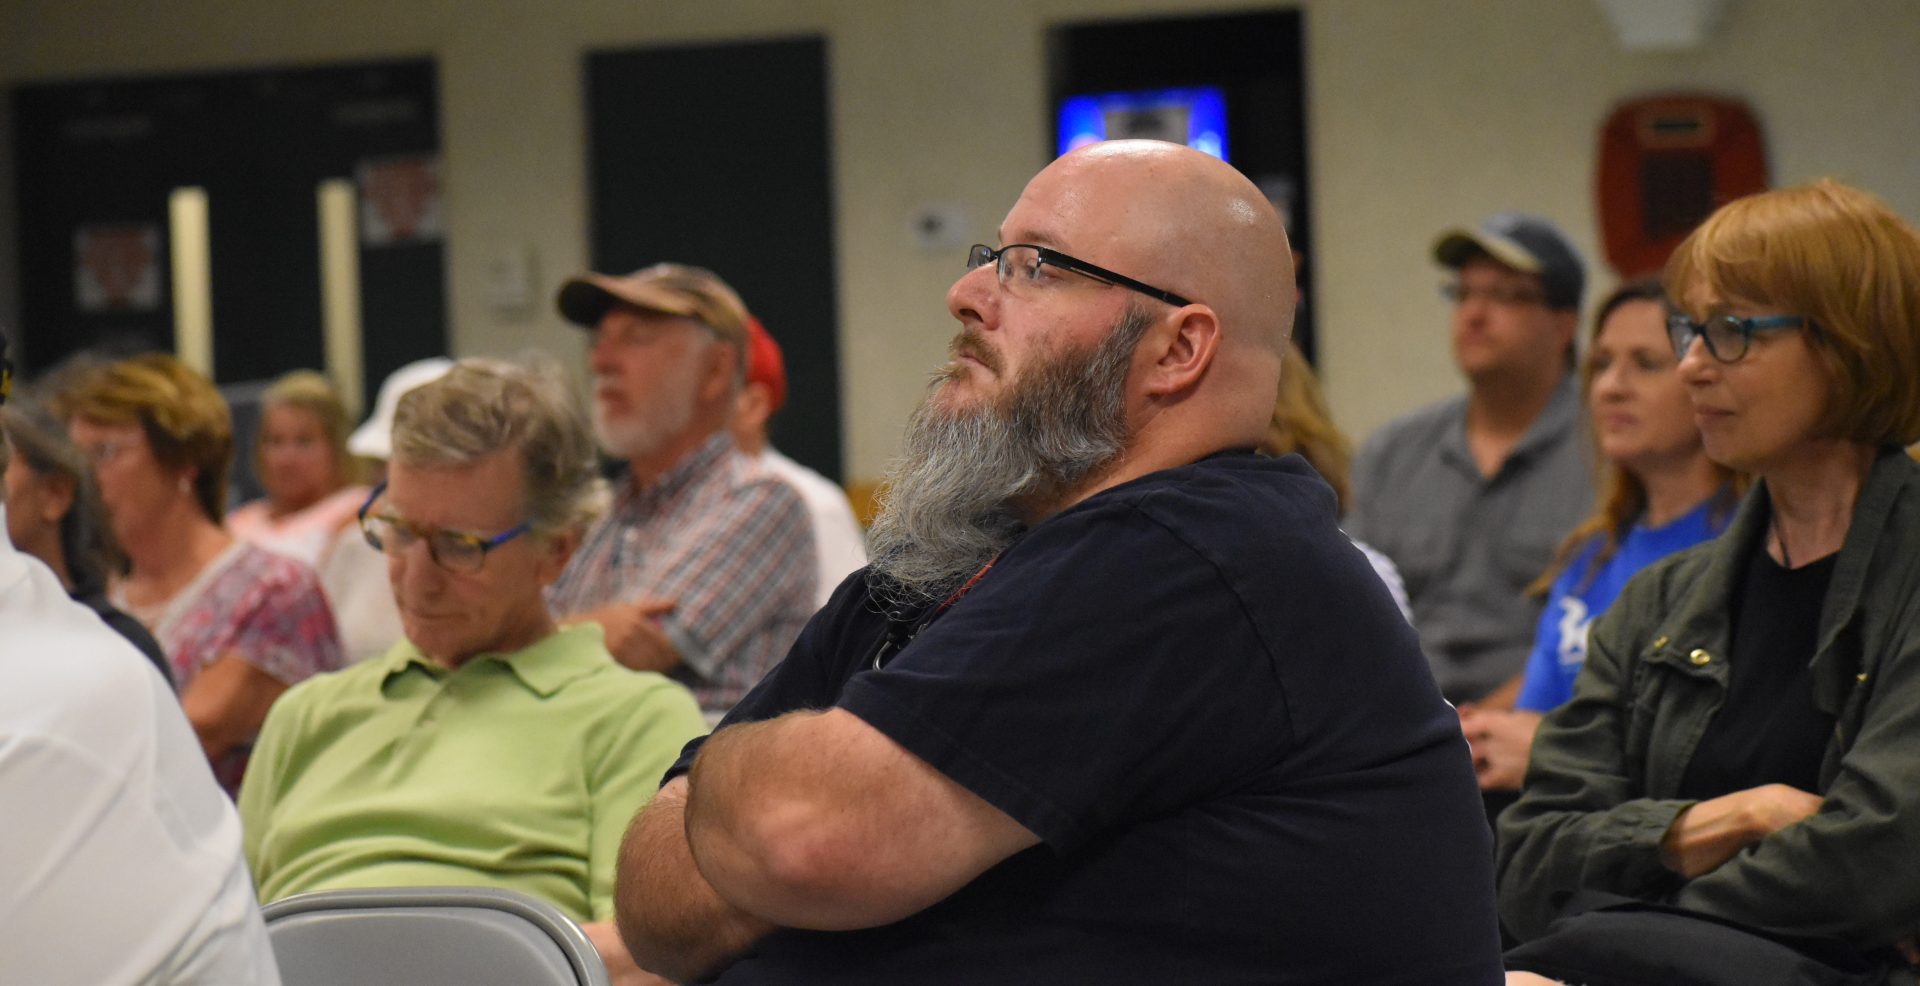 Audience members listen during a town hall with U.S. Rep. Scott Perry at the Hummelstown Fire Department on July 30, 2019.